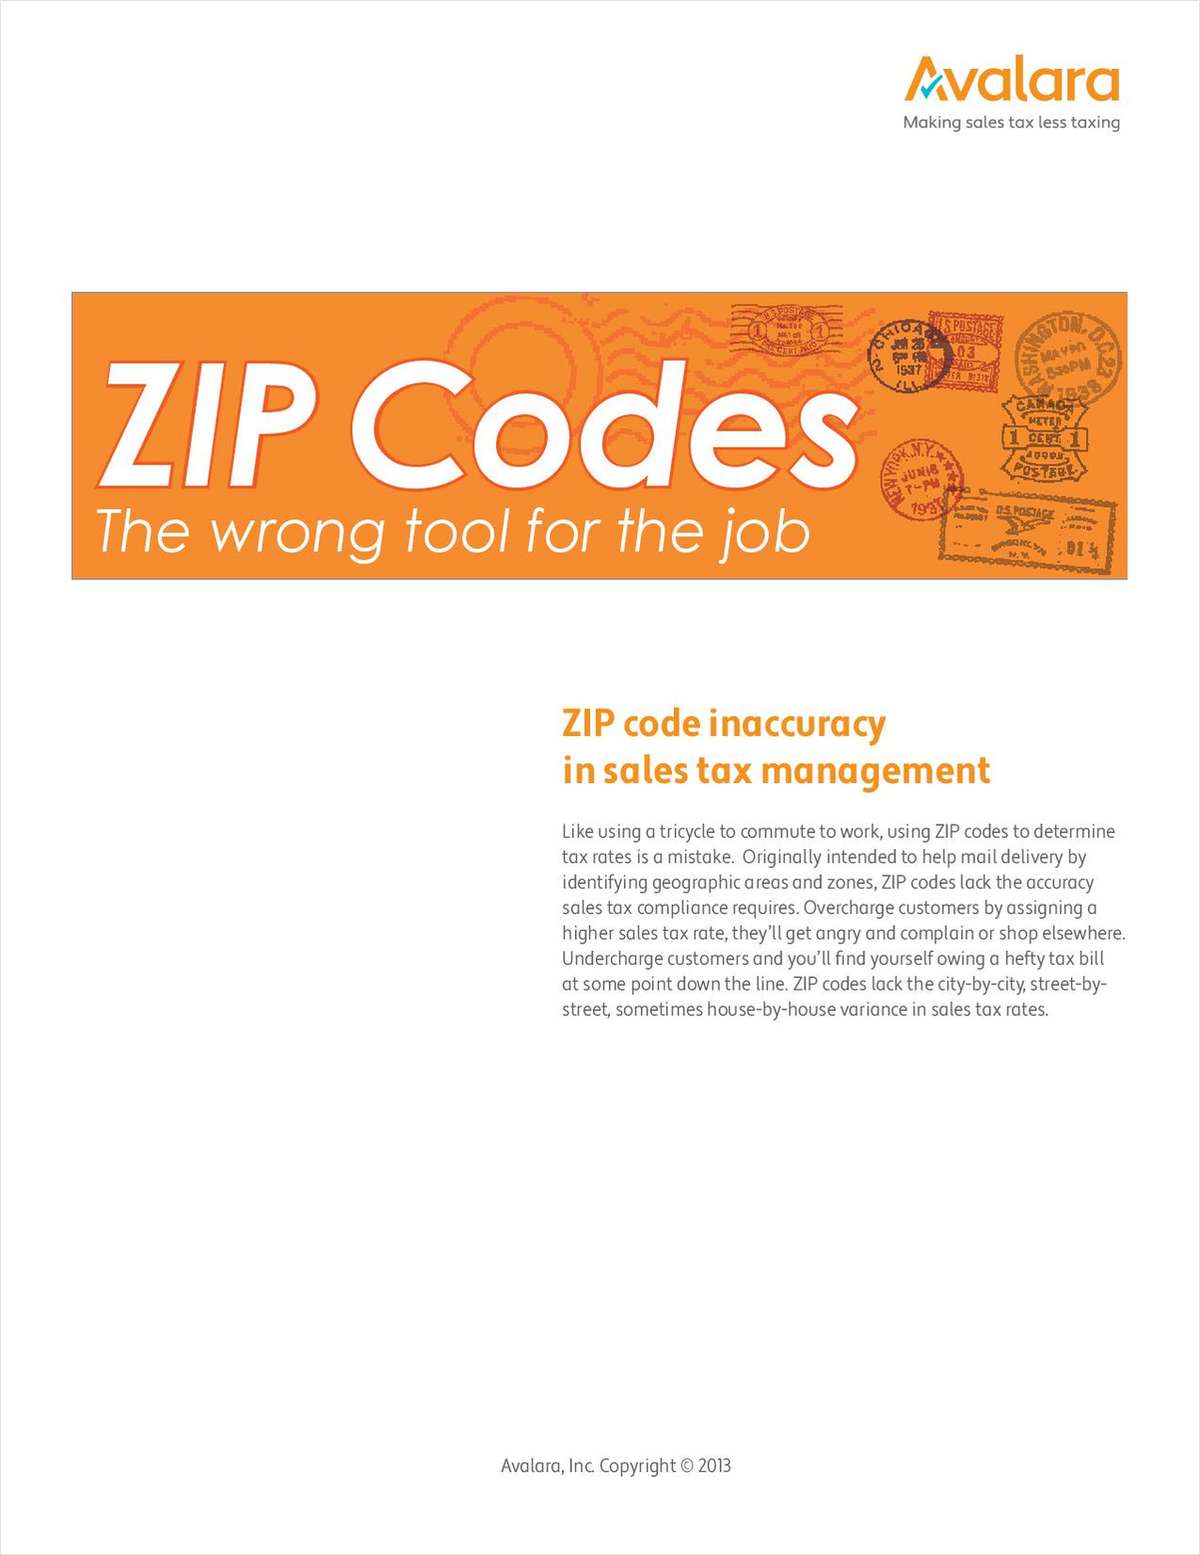 ZIP Codes: The Wrong Tool for Calculating Sales Tax